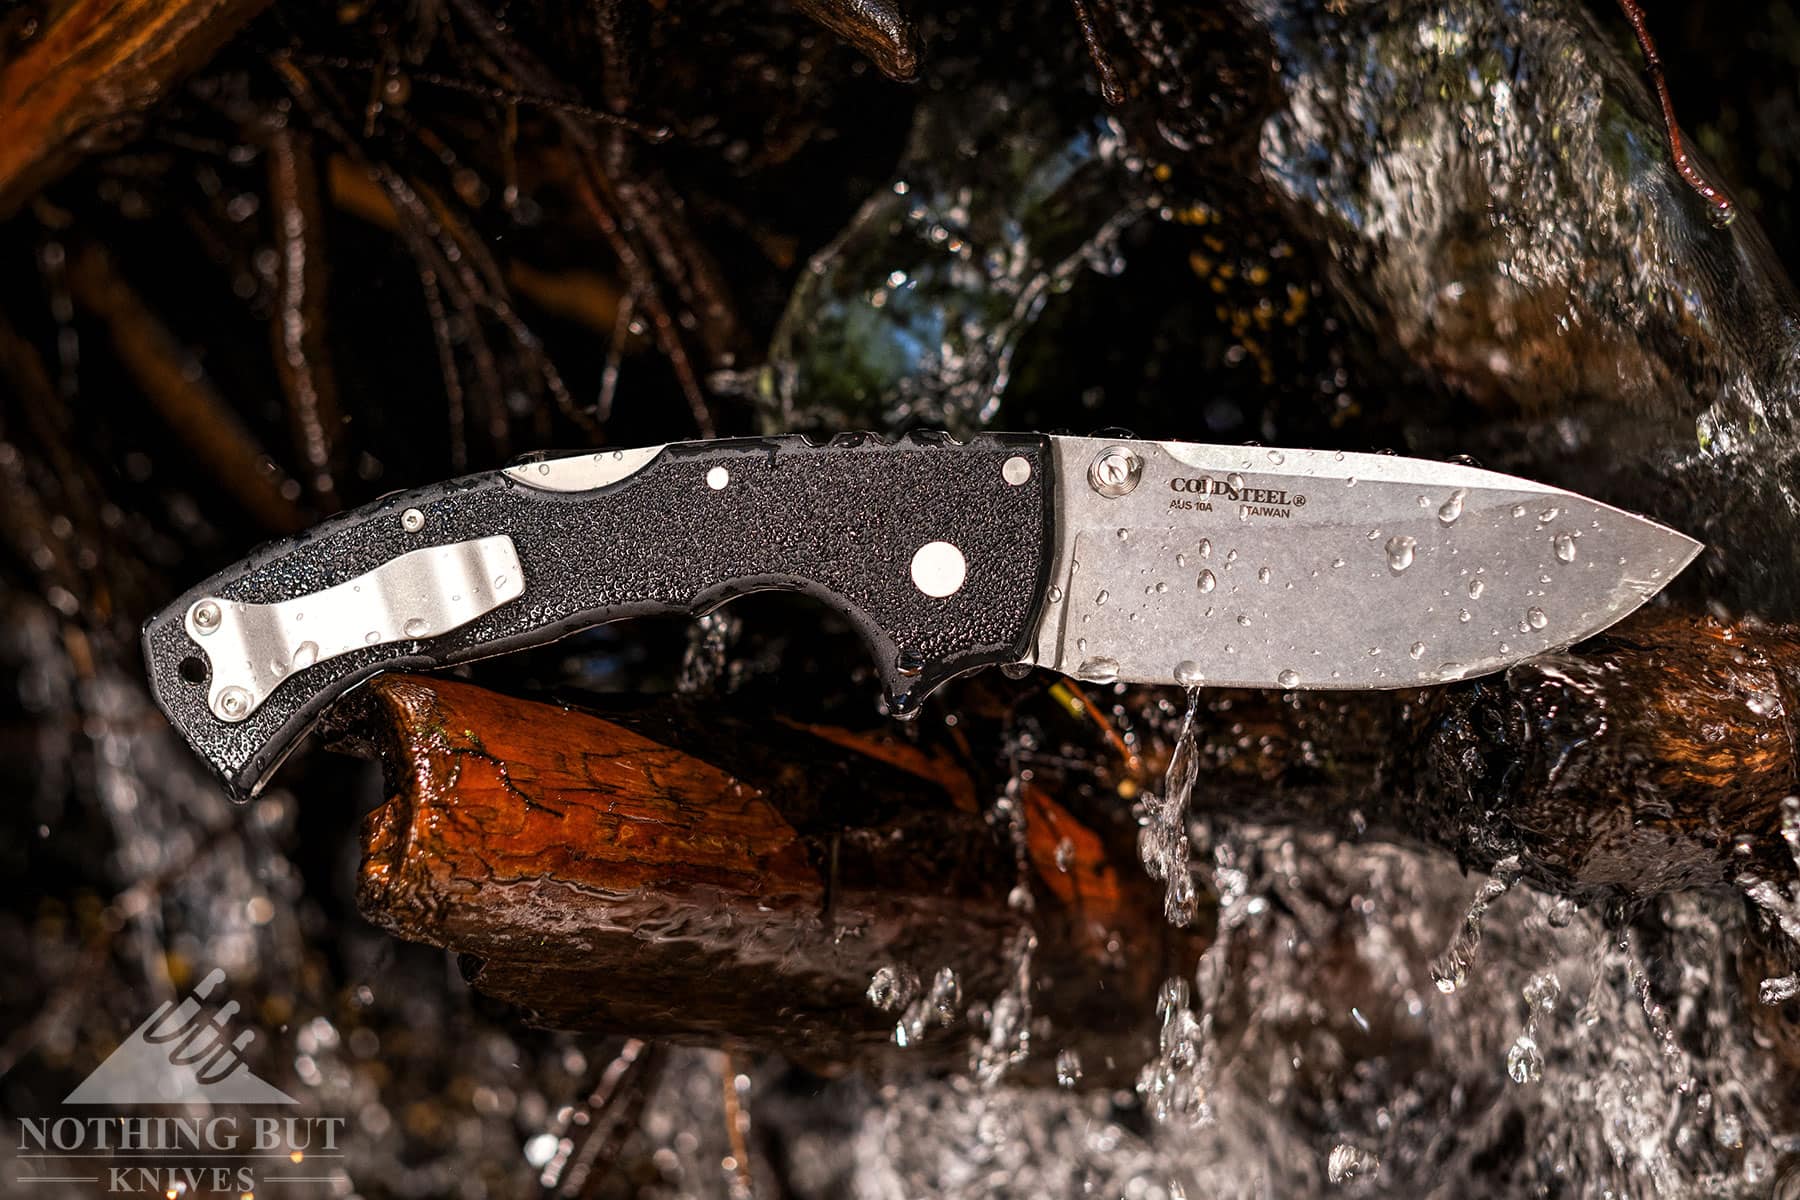 The Cold Steel 4-Max Scout pocket knife in the open position on a branch in a mountain creek.